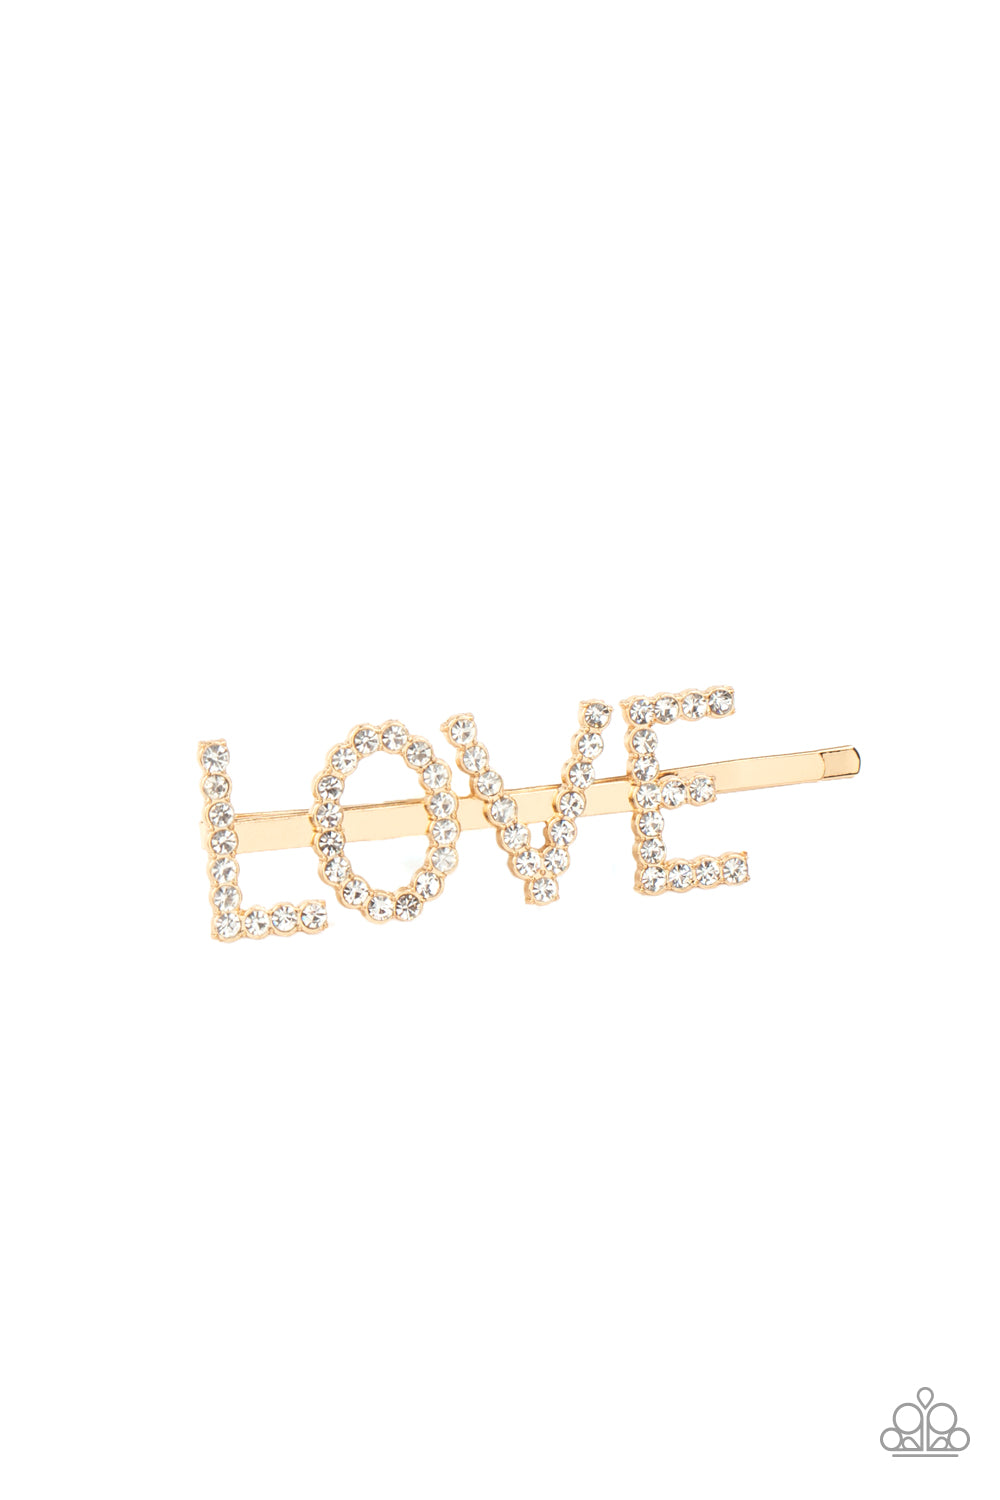 Pin on I love accessories